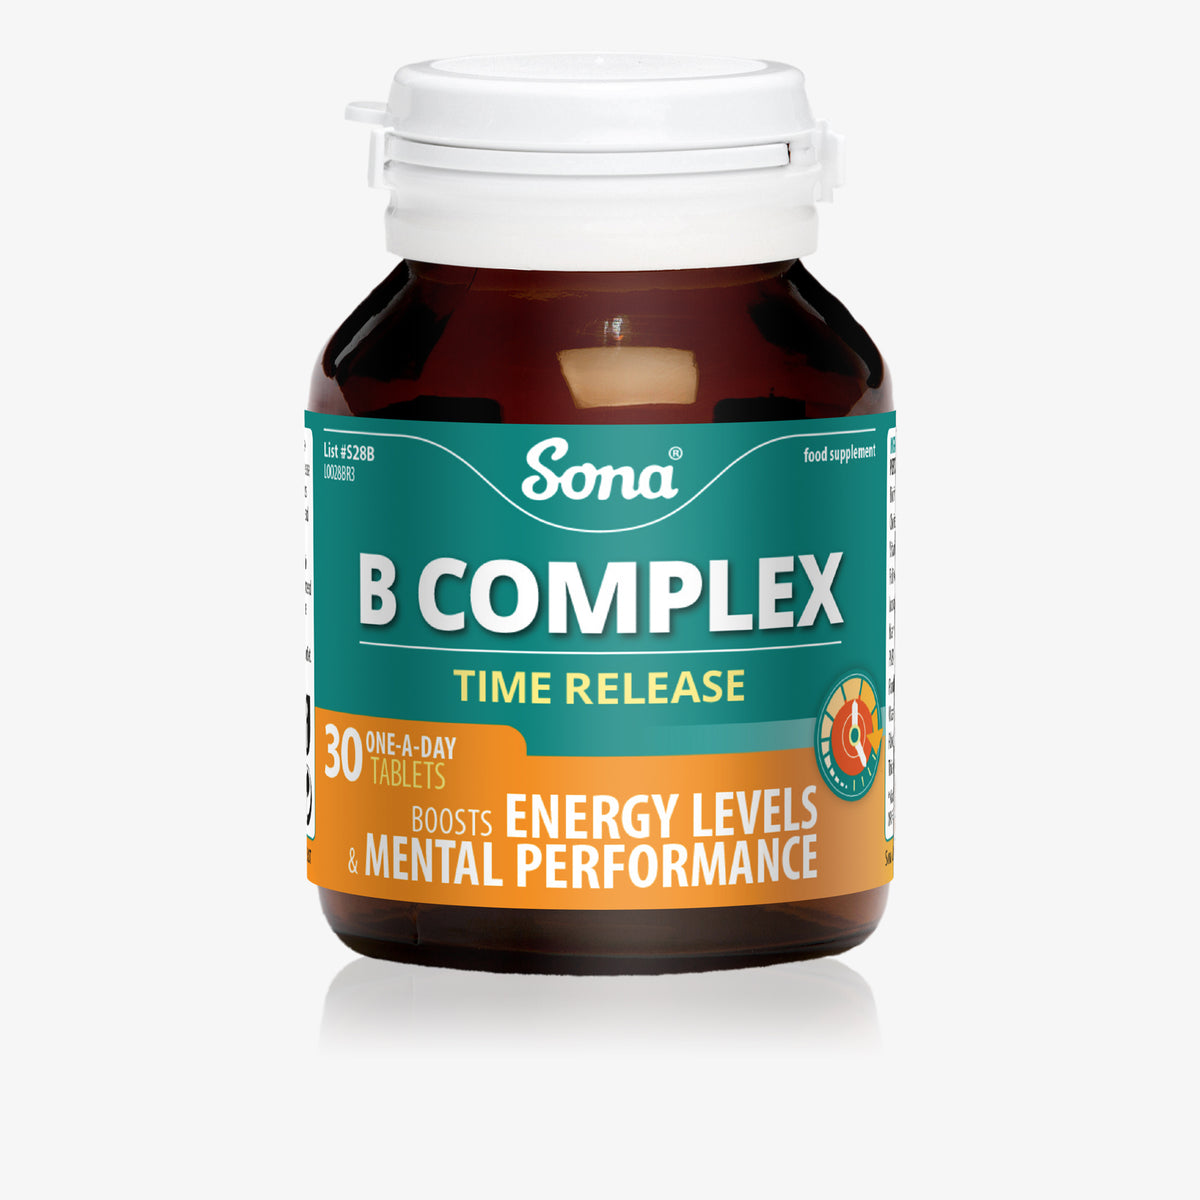 Sona B Complex - Vitamin B Time Release tablets